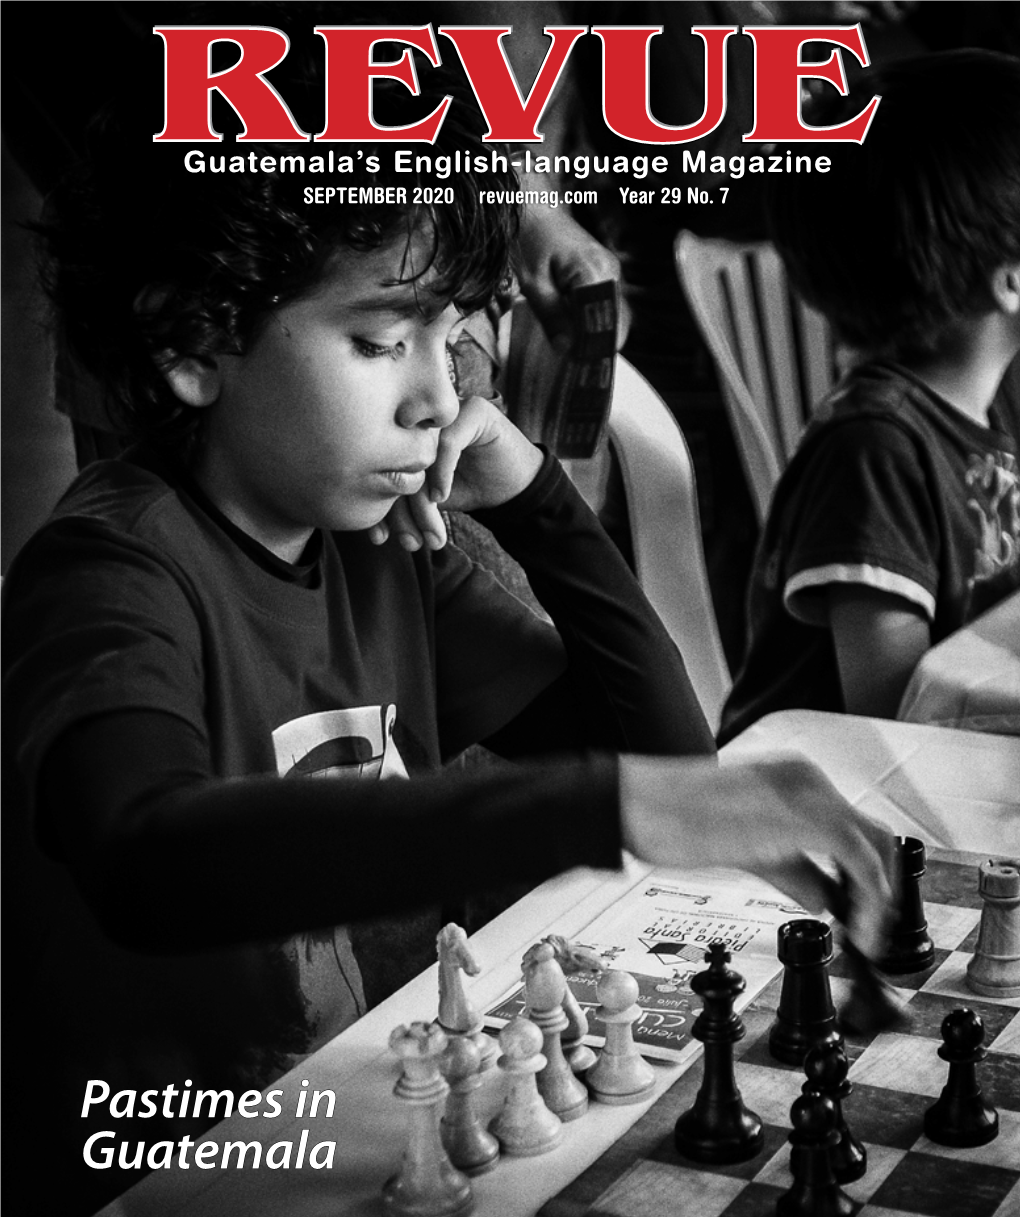 Pastimes in Guatemala THIS MONTH in REVUE